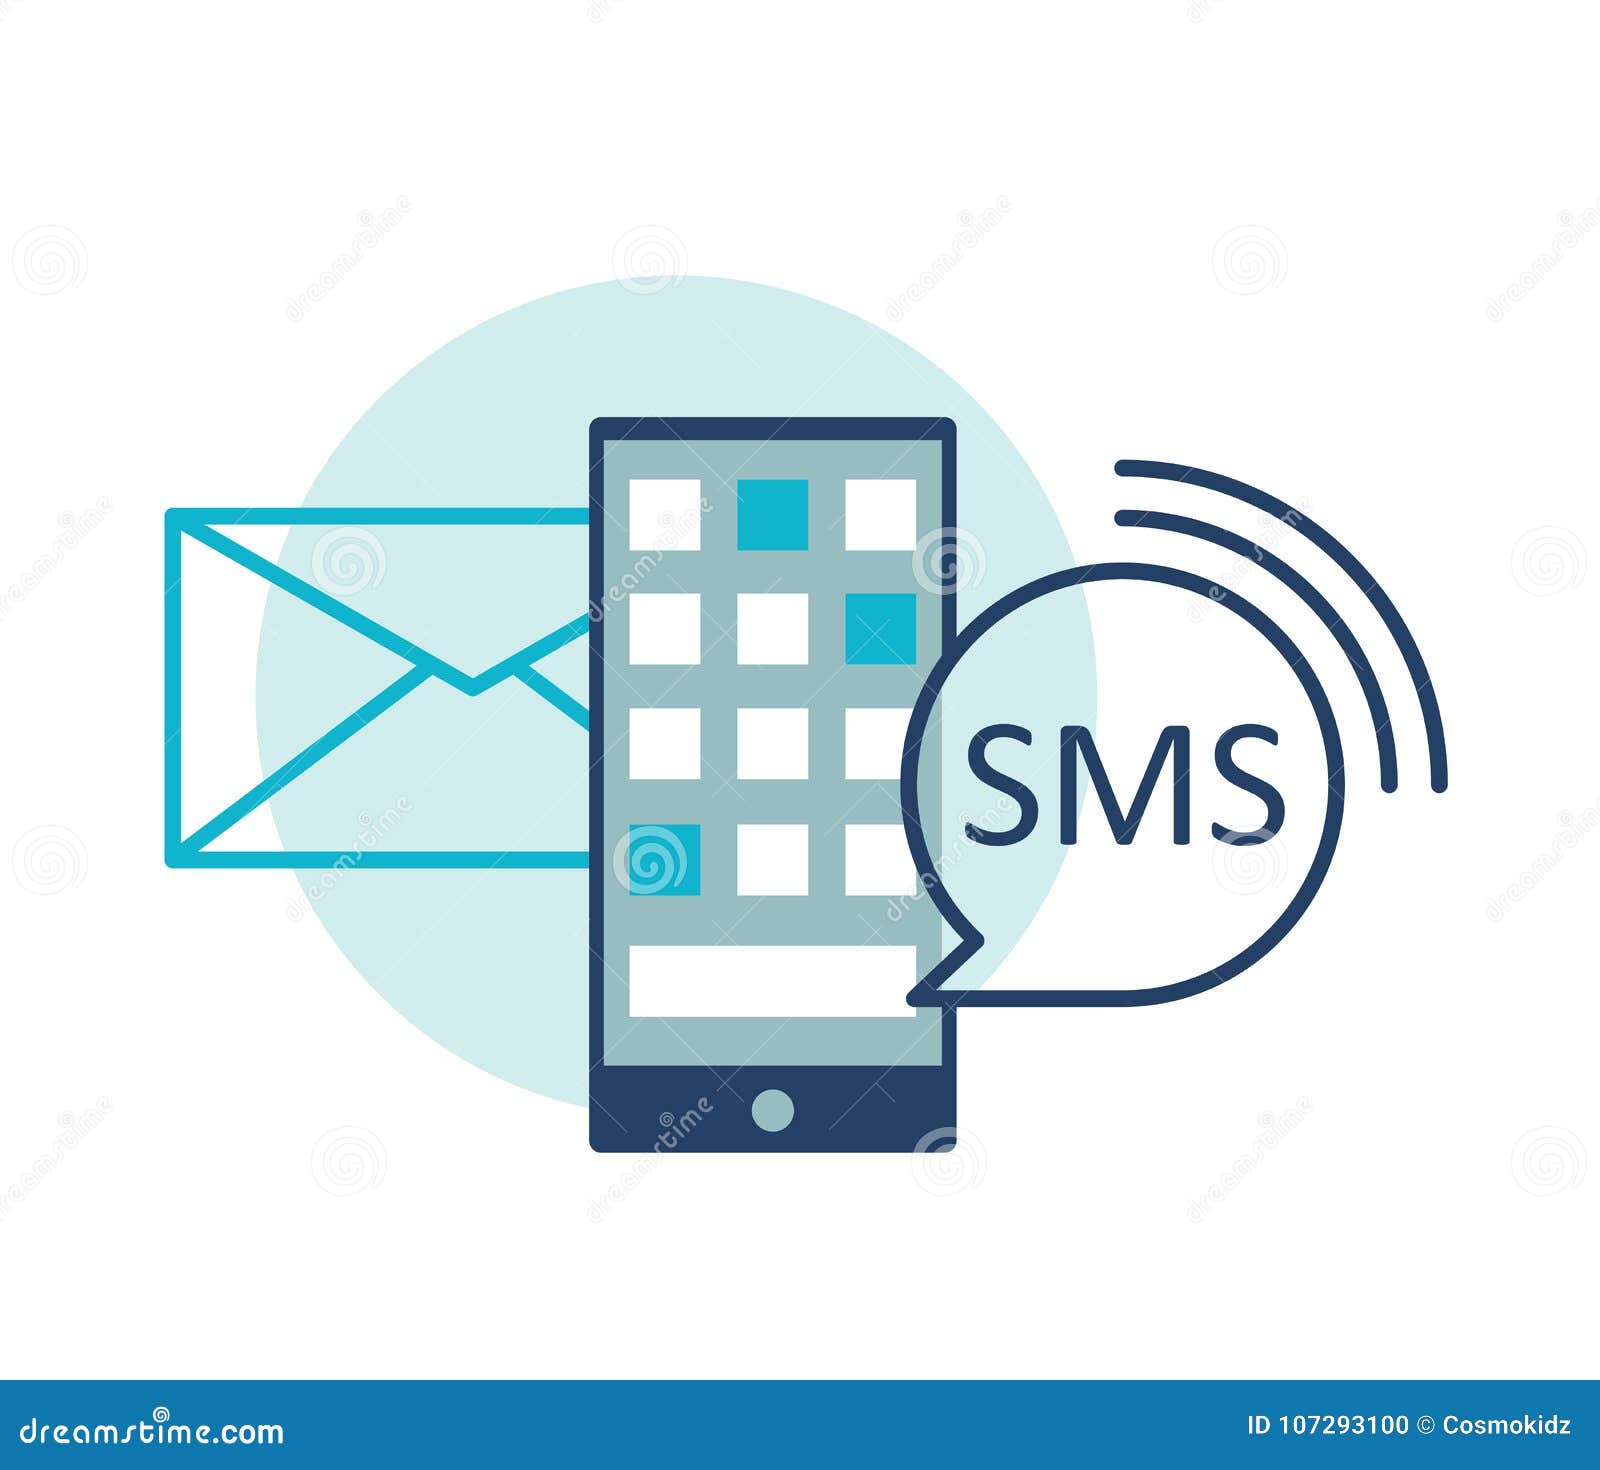 sms, email notification for smartphone  icon